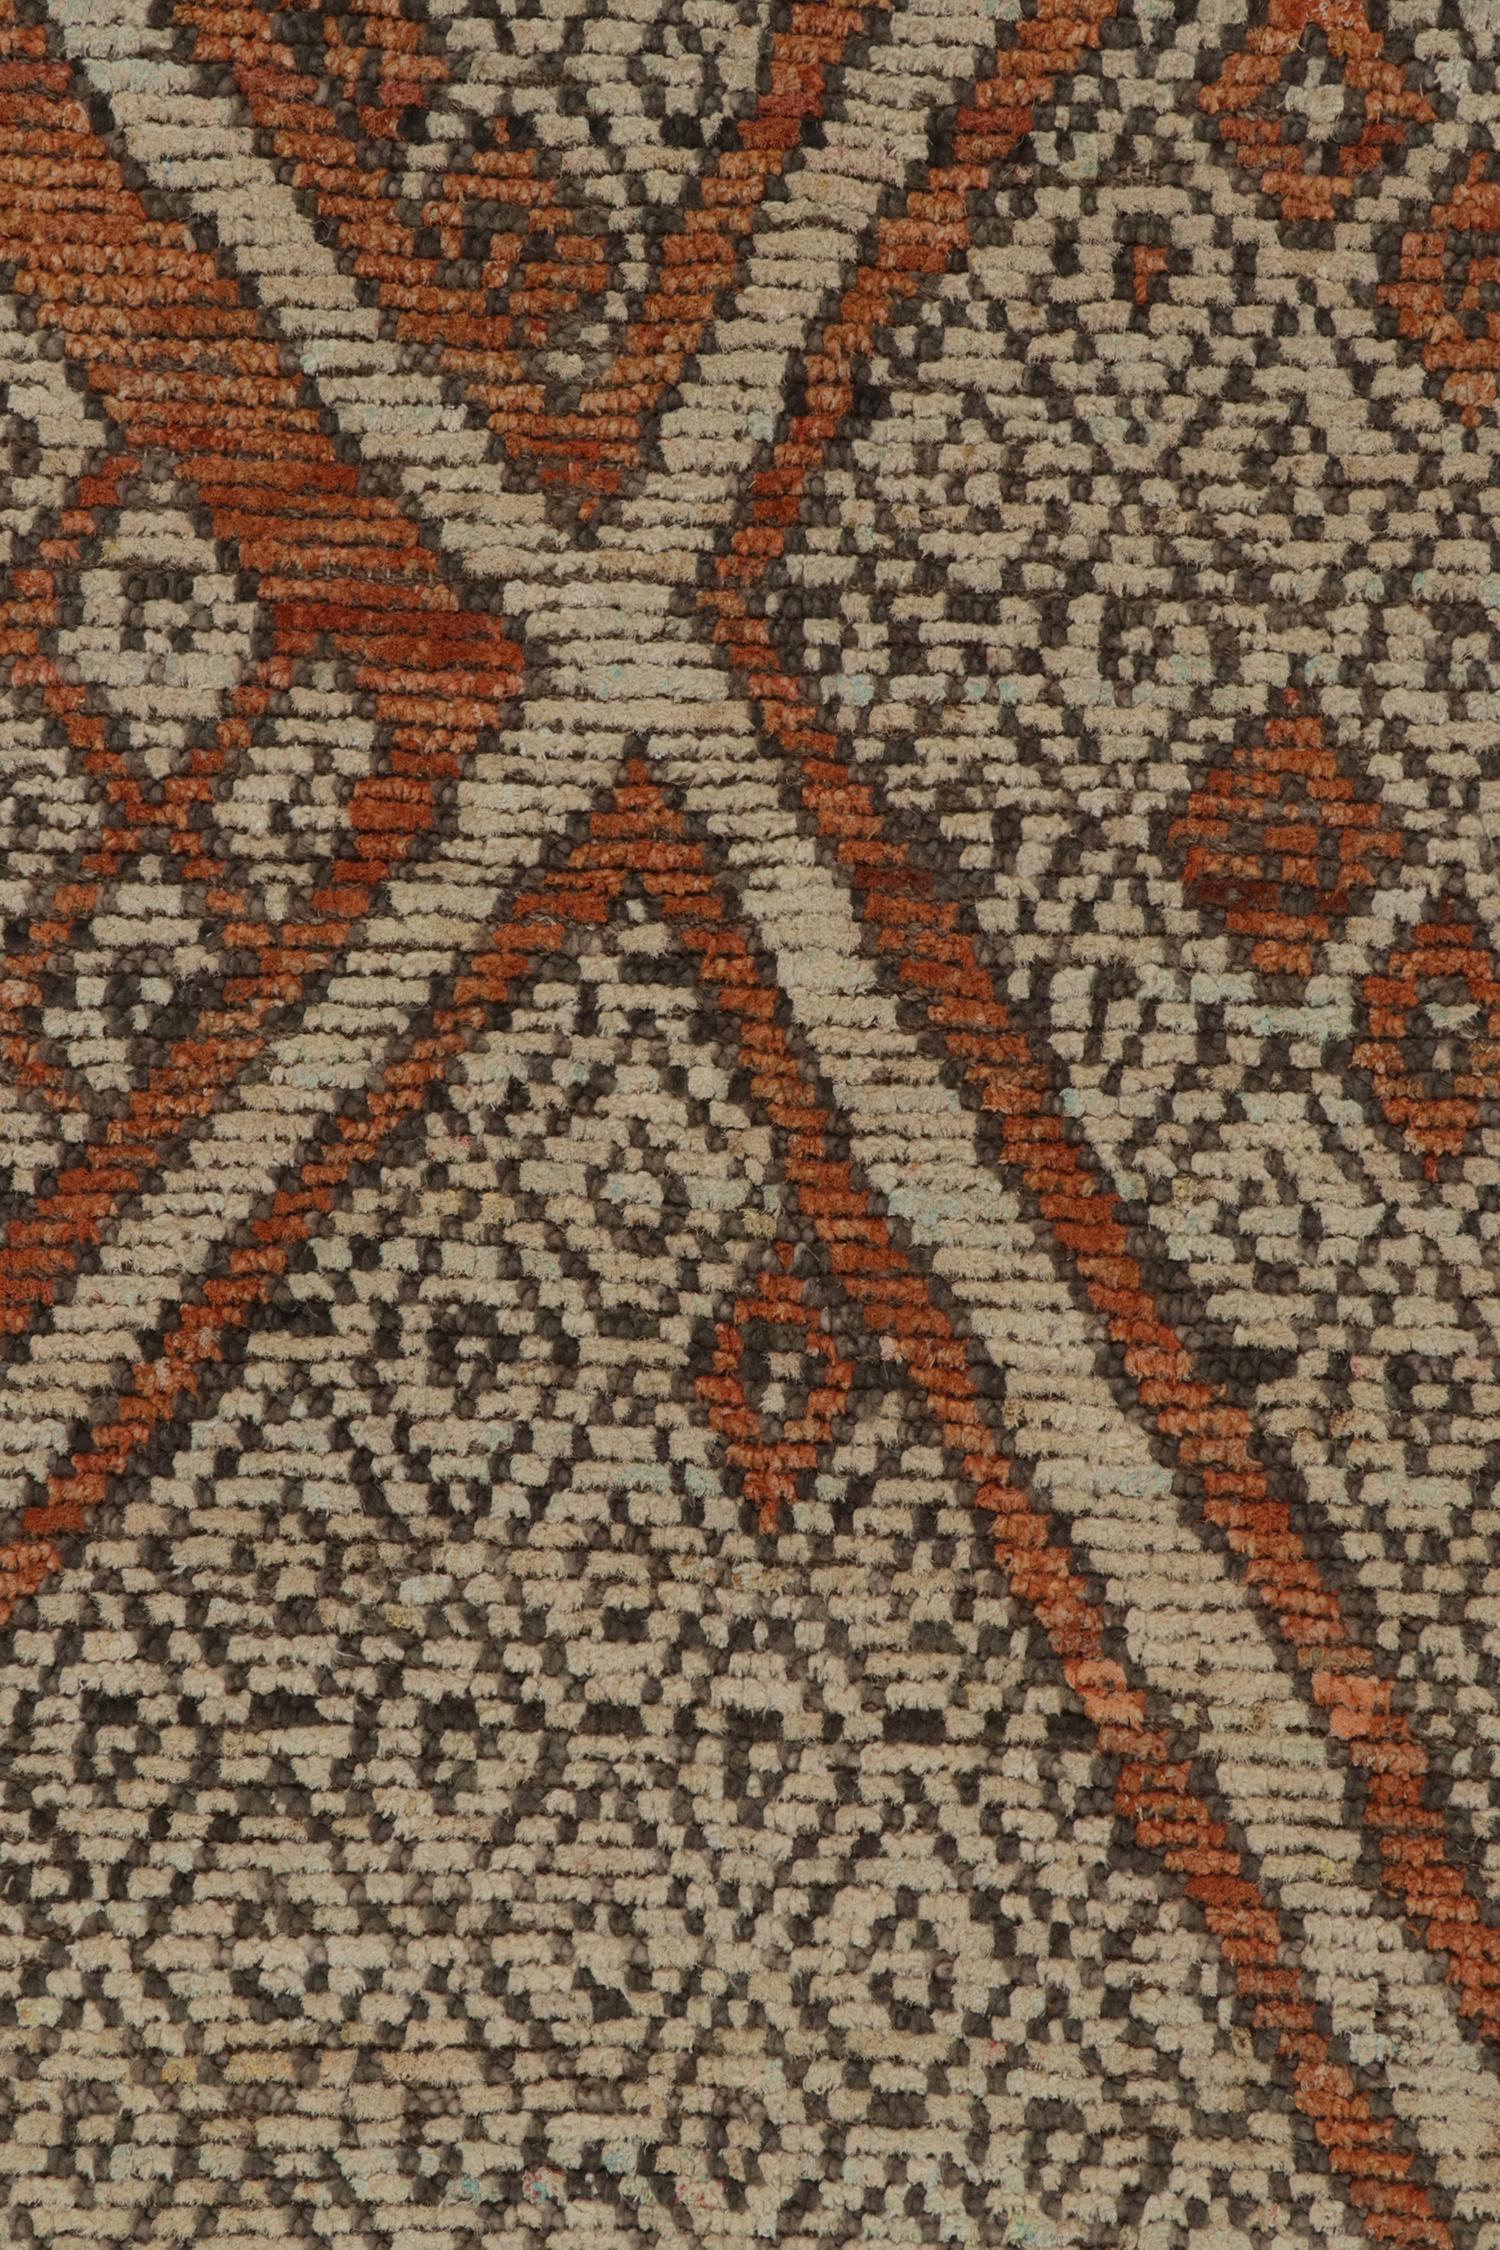 Hand-Knotted Rug & Kilim’s Moroccan Style Rug in Orange, White & Beige-Brown Diamond Patterns For Sale